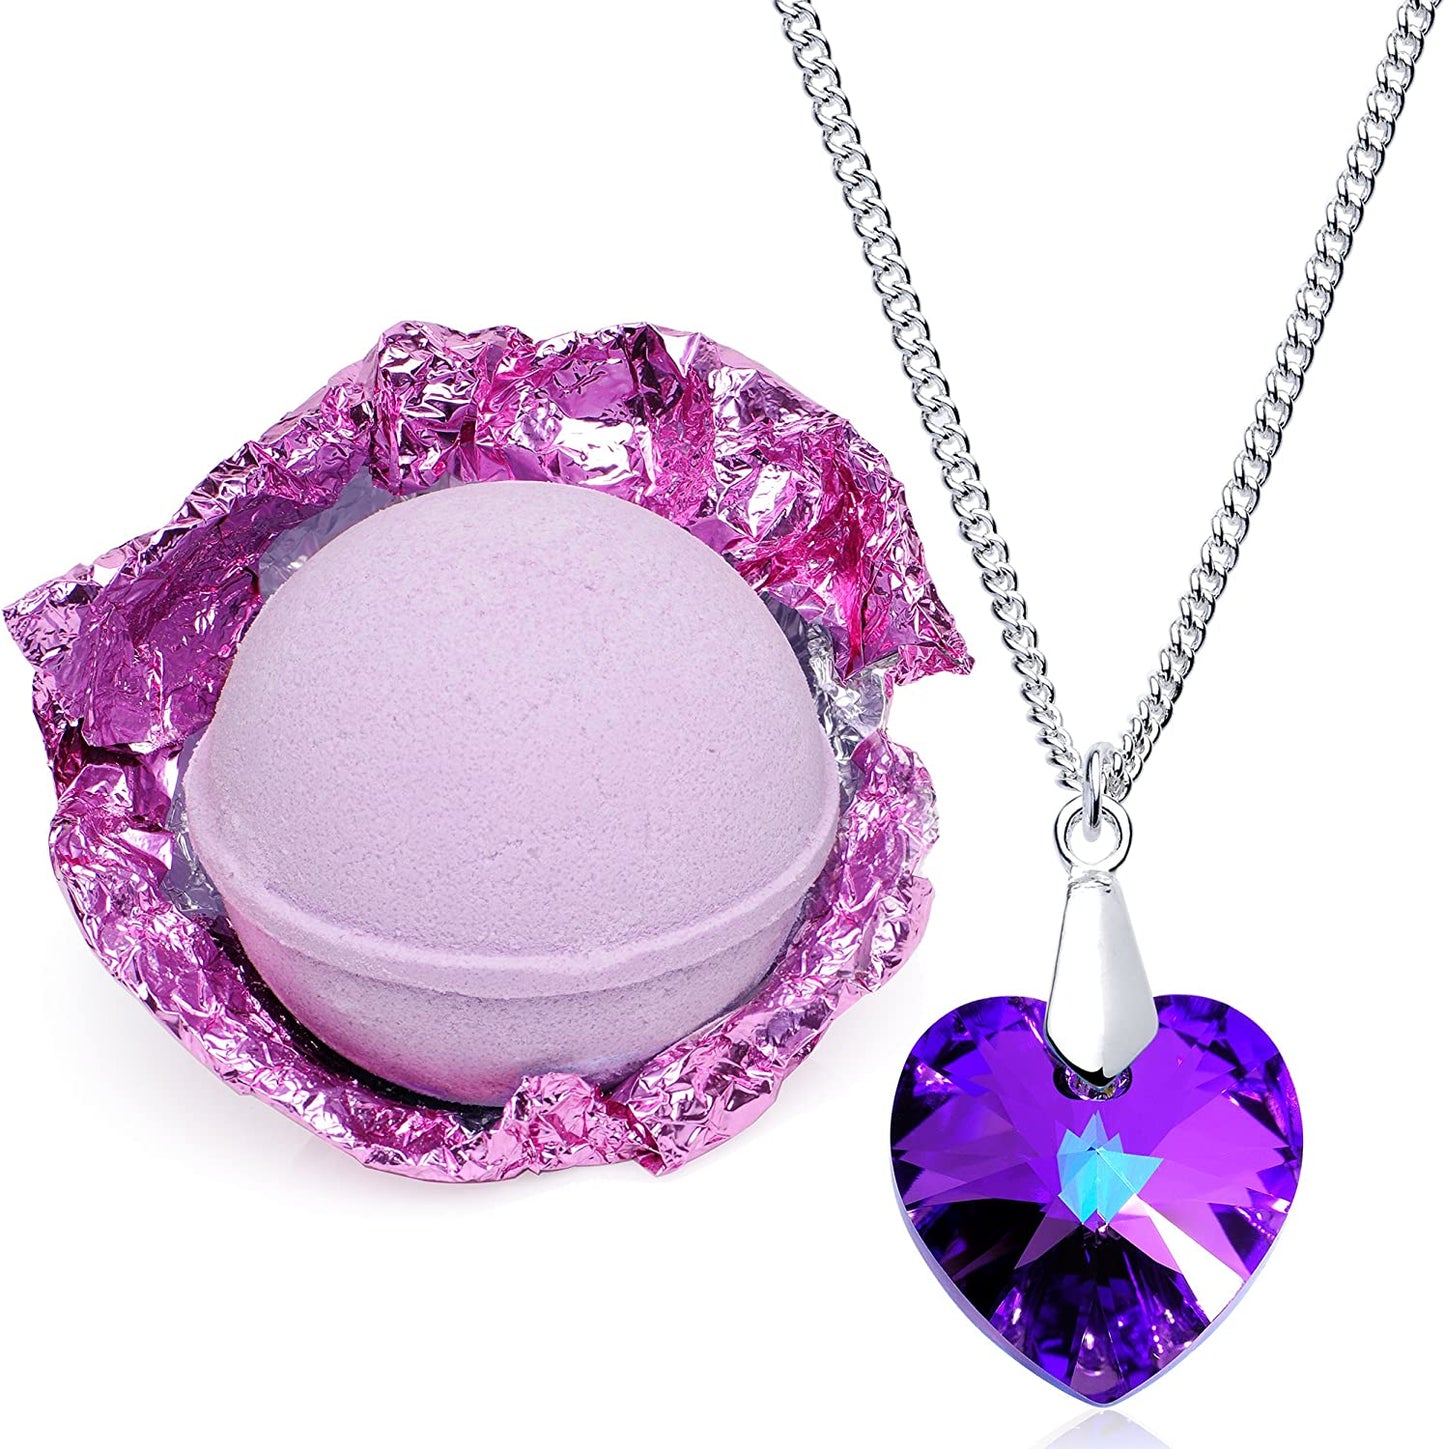 A half unwrapped purple lavender bath bomb with a heart shaped necklace next to it.